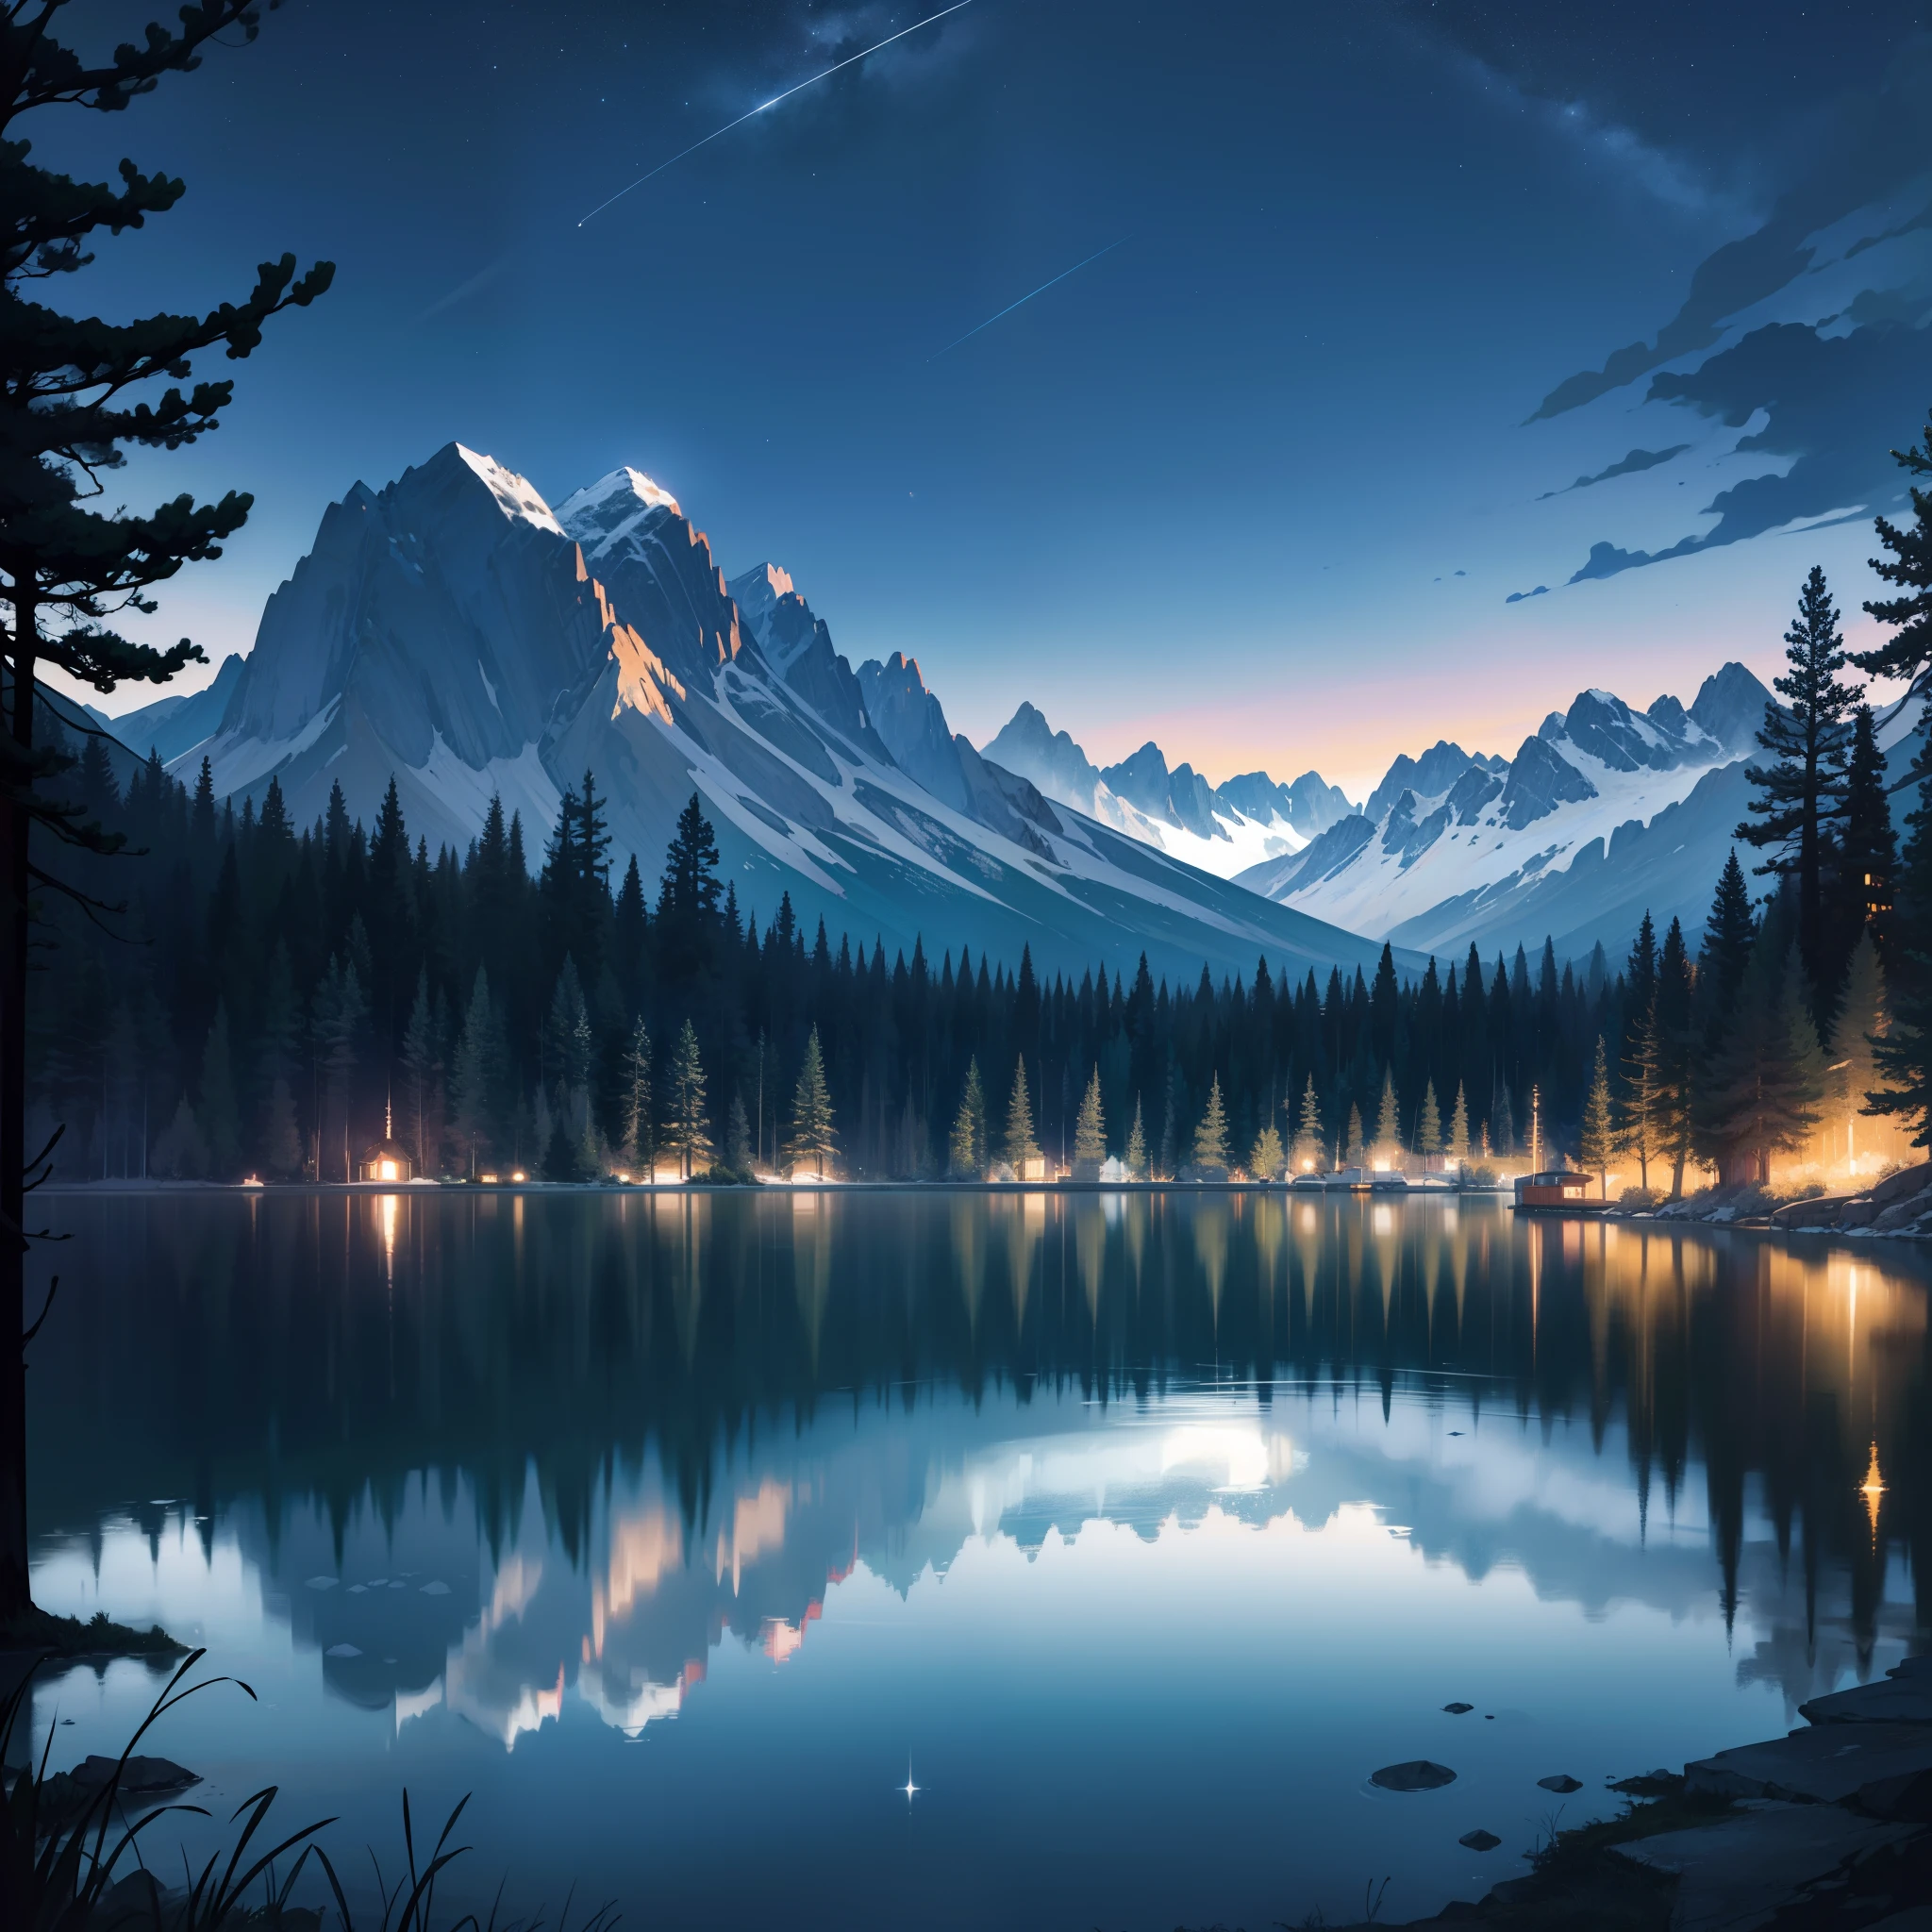 highres, HDR, moonlight, serene, peaceful, stars, reflection on water, mountains in the background, pine trees, mist, calm water, tranquil atmosphere, vibrant colors, breathtaking view, detailed textures, clear skies, city lights in the distance, picturesque, ethereal, gorgeous landscape.